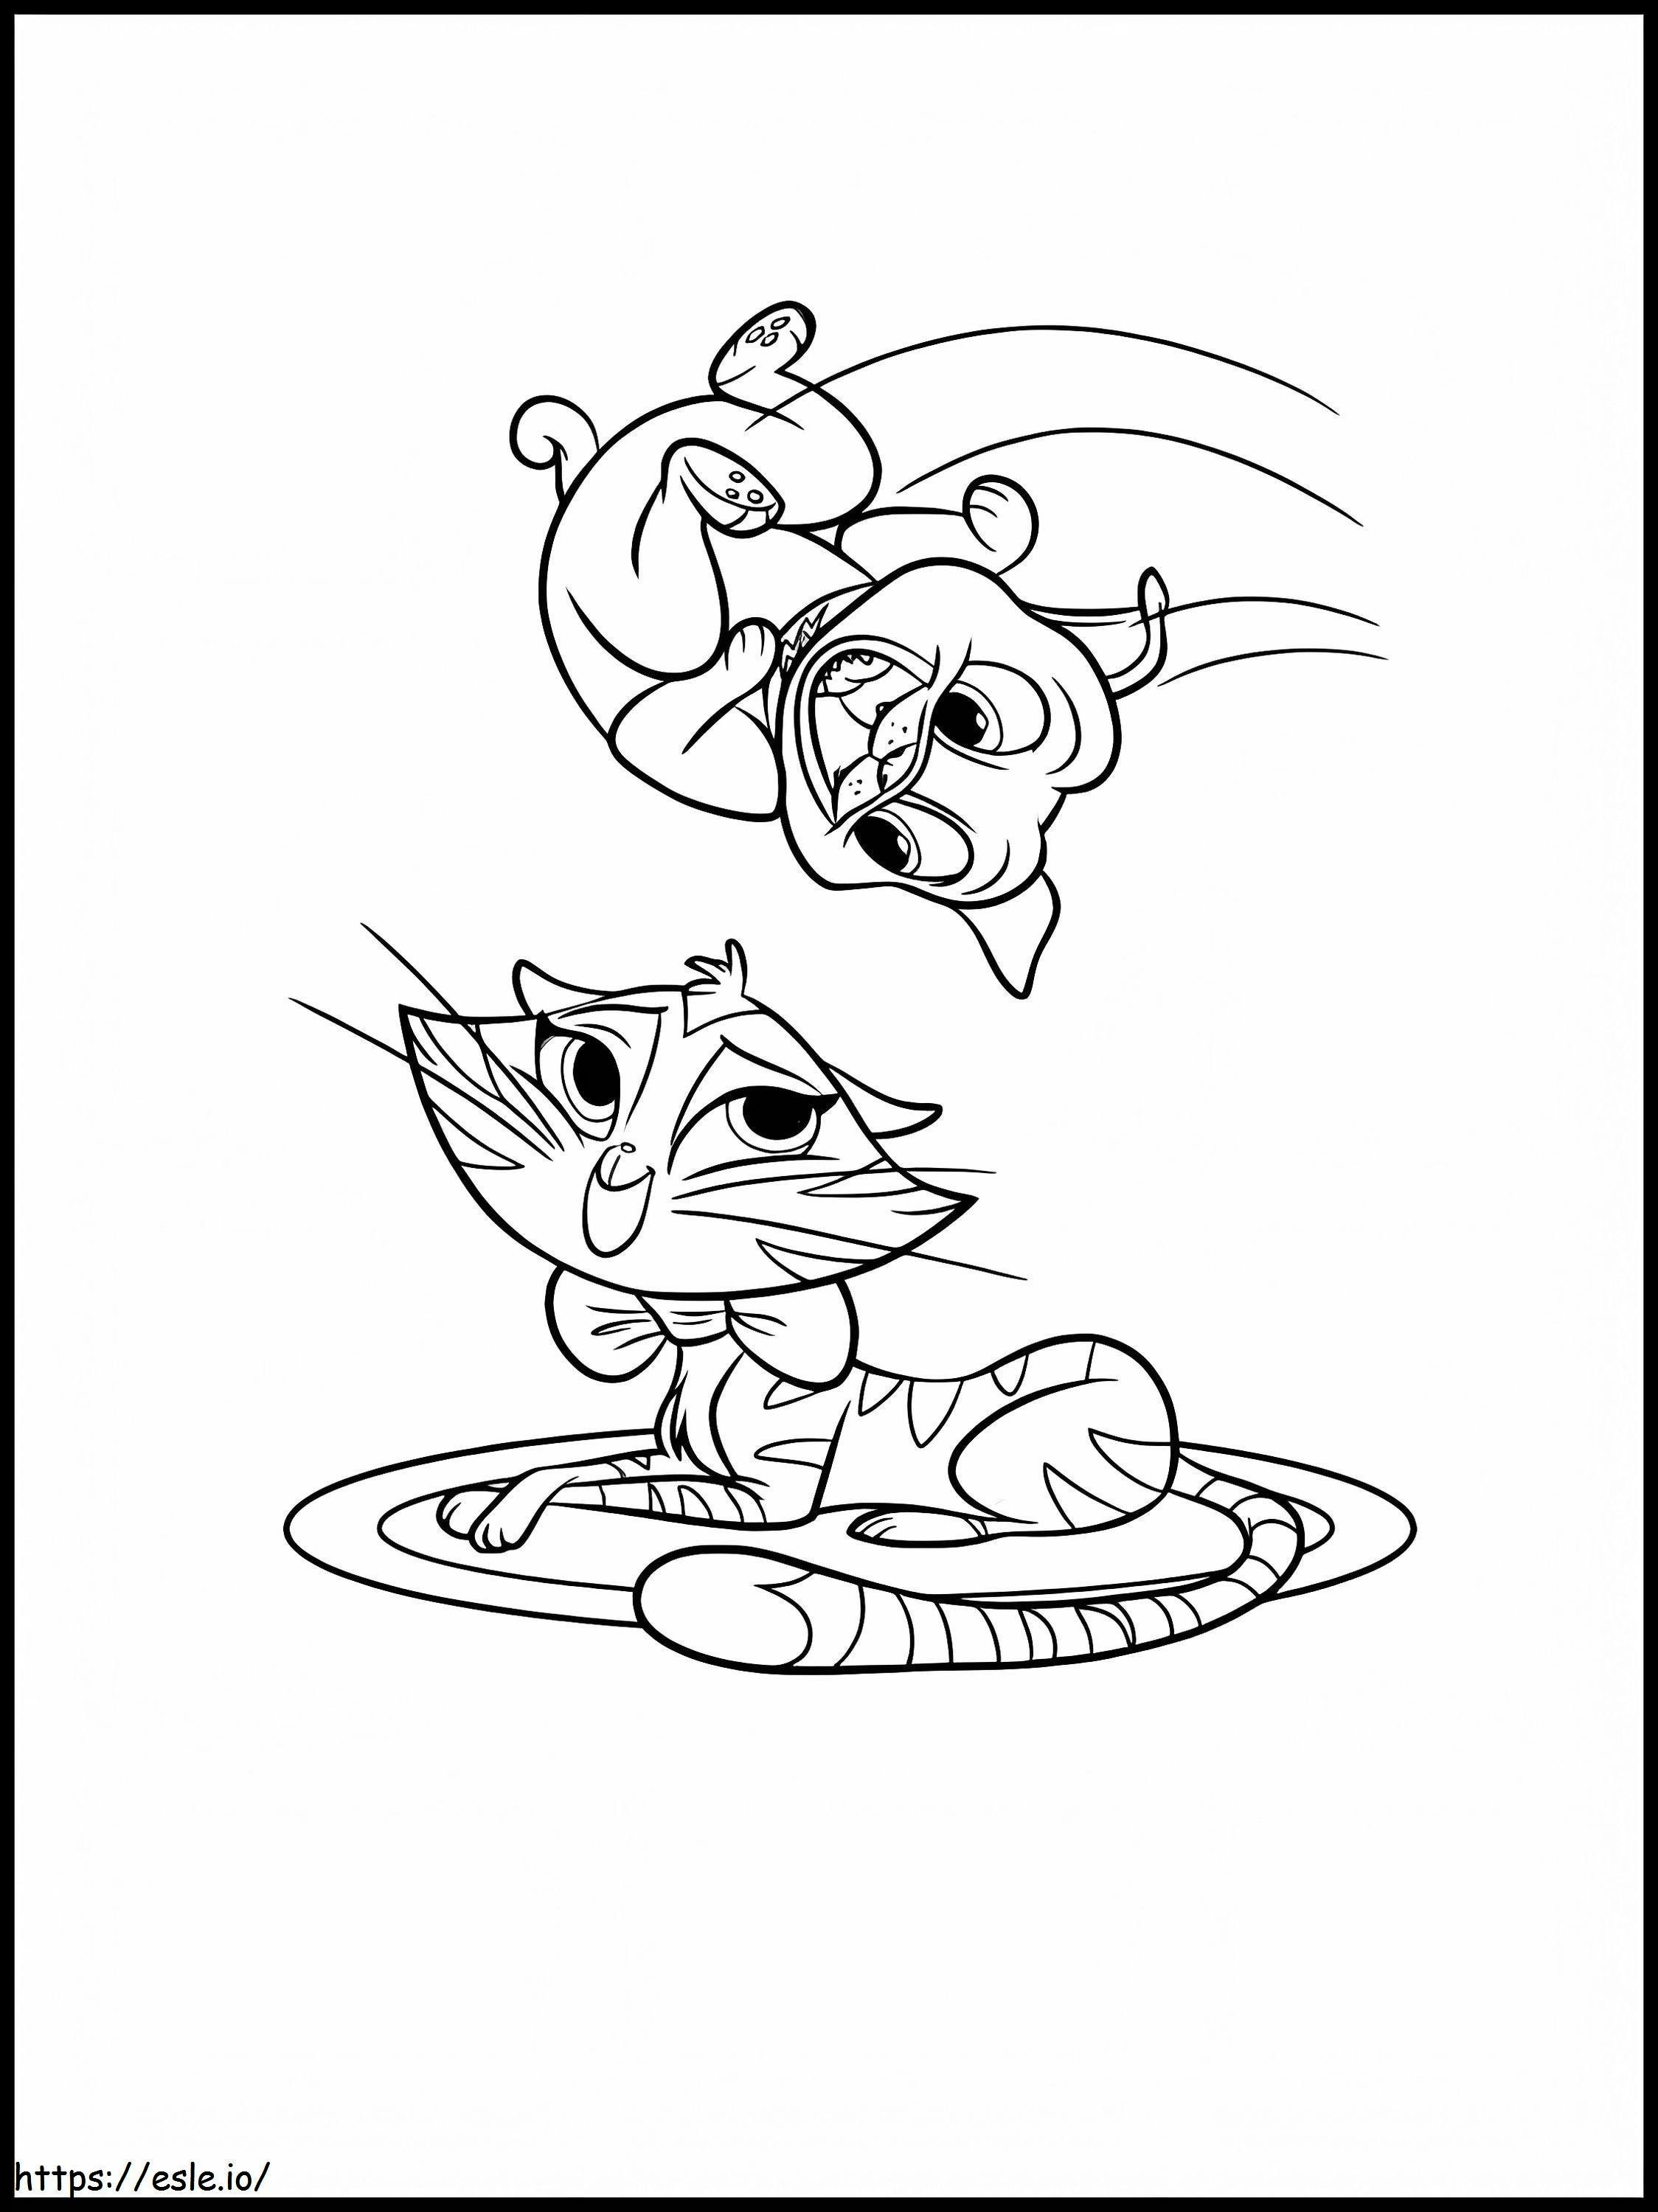 Bingo Jump And Whistle coloring page